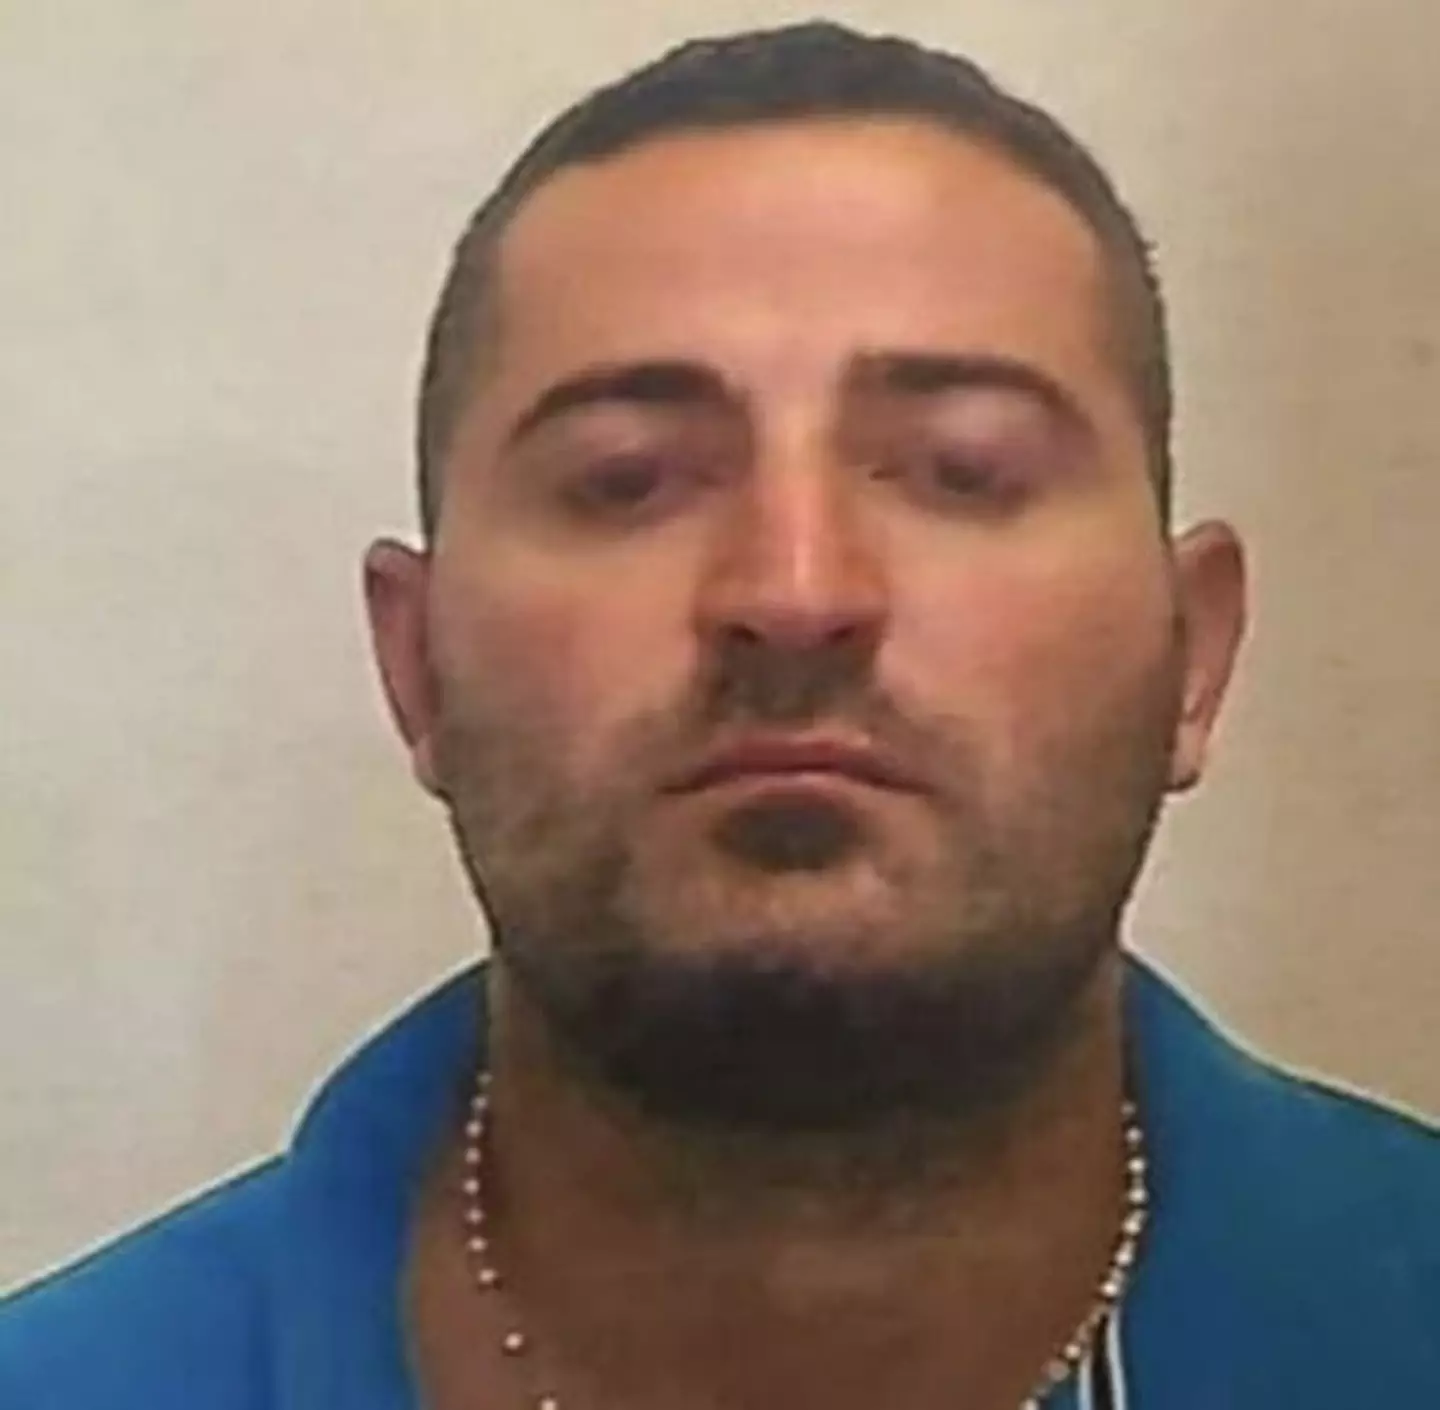 Police have launched a manhunt to find the mafia boss.